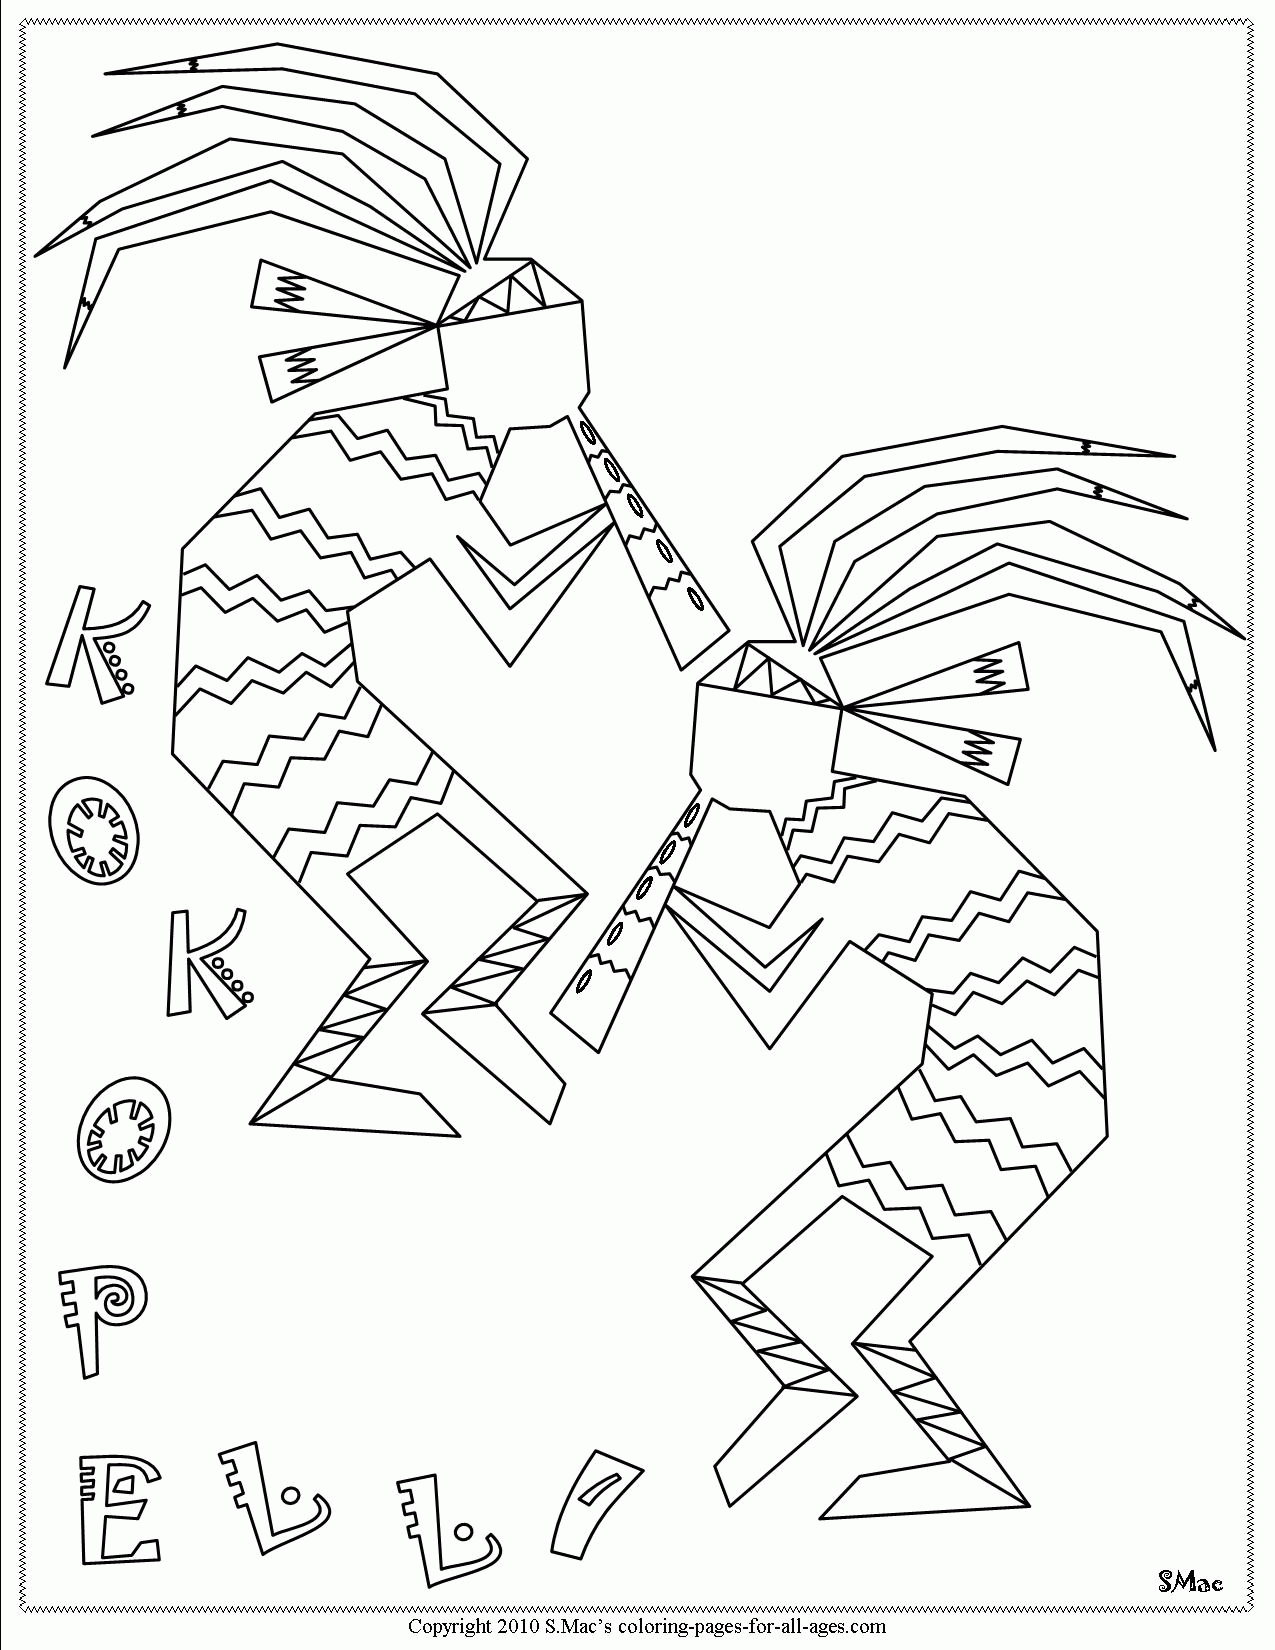 Aztec Pottery Coloring Pages - Coloring Pages For All Ages